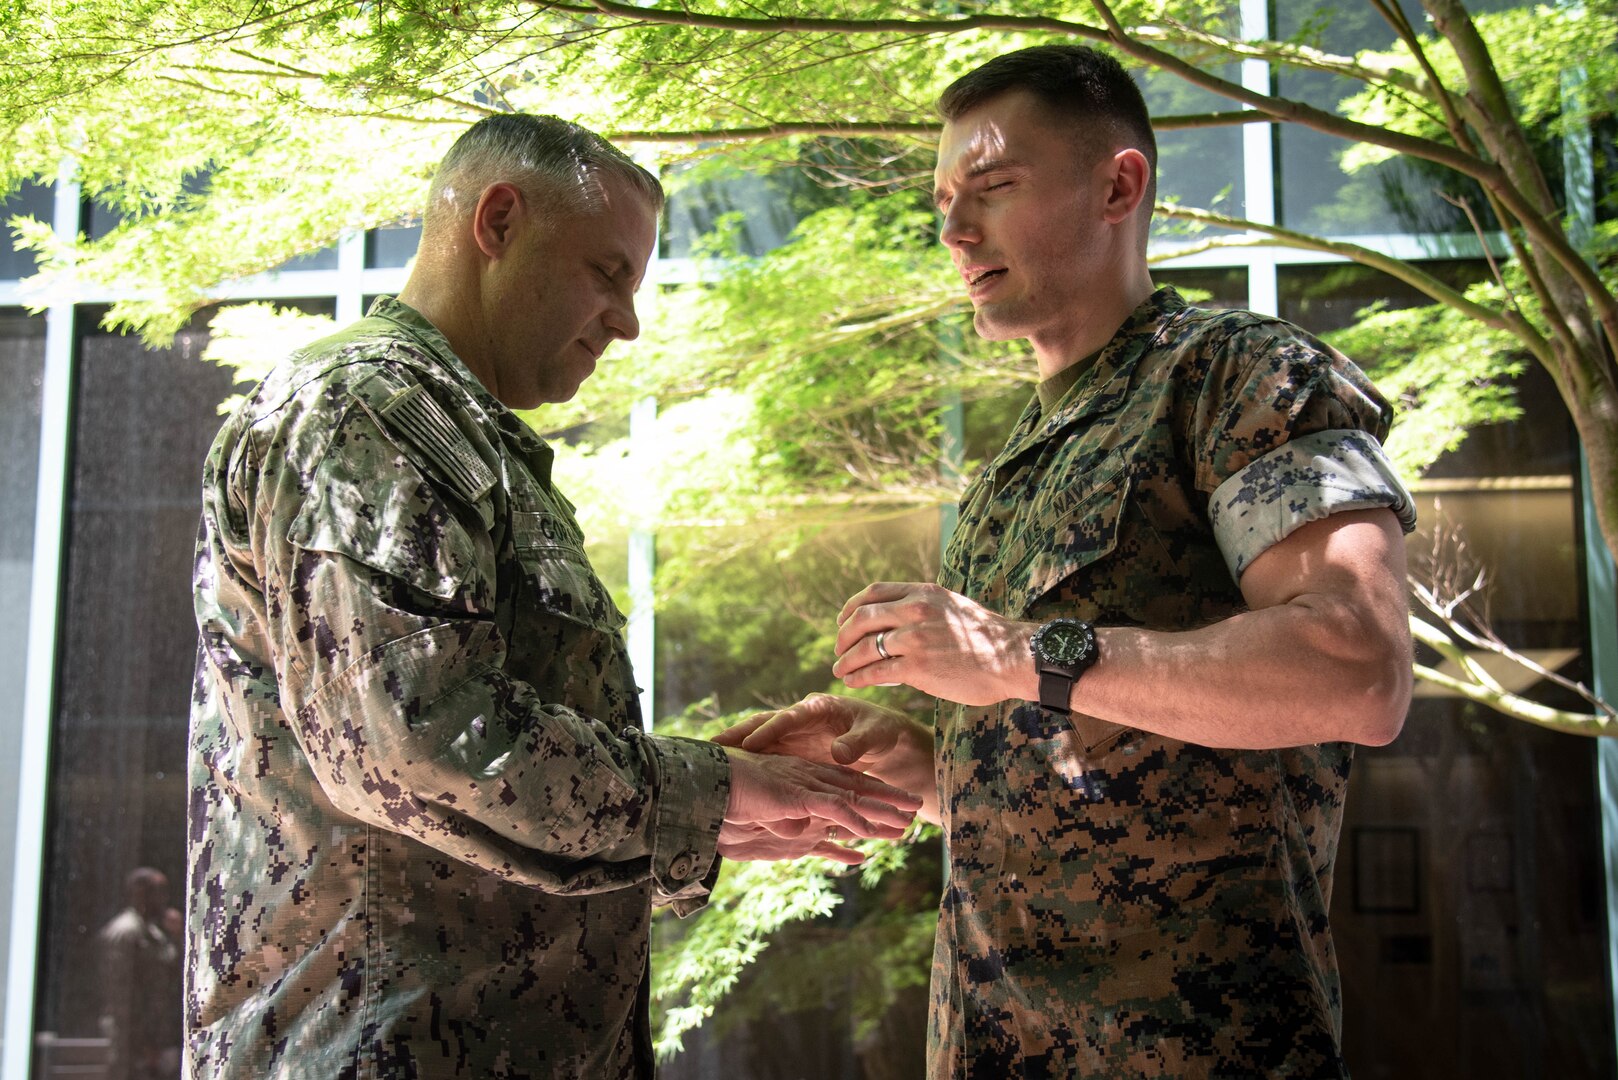 Navy Chaplain Lieutenant Kyle Lambertson, right, anoints the hands of Senior Chief Petty Officer Michael Corapi, left, the Senior Enlisted Advisor of Naval Health Clinic Cherry Point during a Blessing of the Hands ceremony held Tuesday, May 9 aboard Naval Health Clinic Cherry Point.  The ceremony, held as part of National Nurses Week, honored Sailors and civilians involved in patient care and administration aboard the facility.